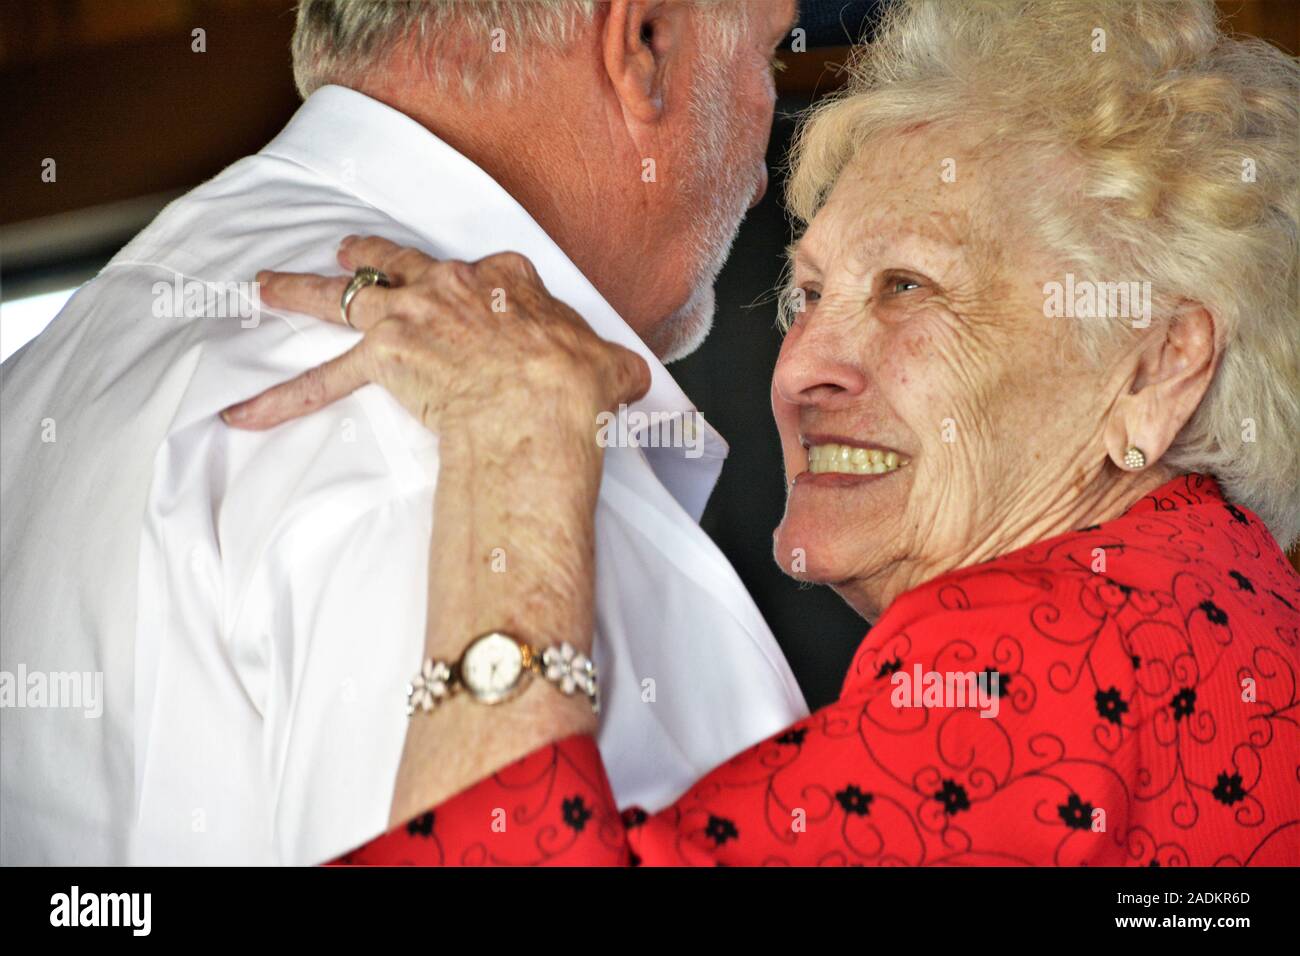 85+ year old mother dancing with her son at a wedding being happy and having a fine time together at granddaughters first wedding in family Stock Photo